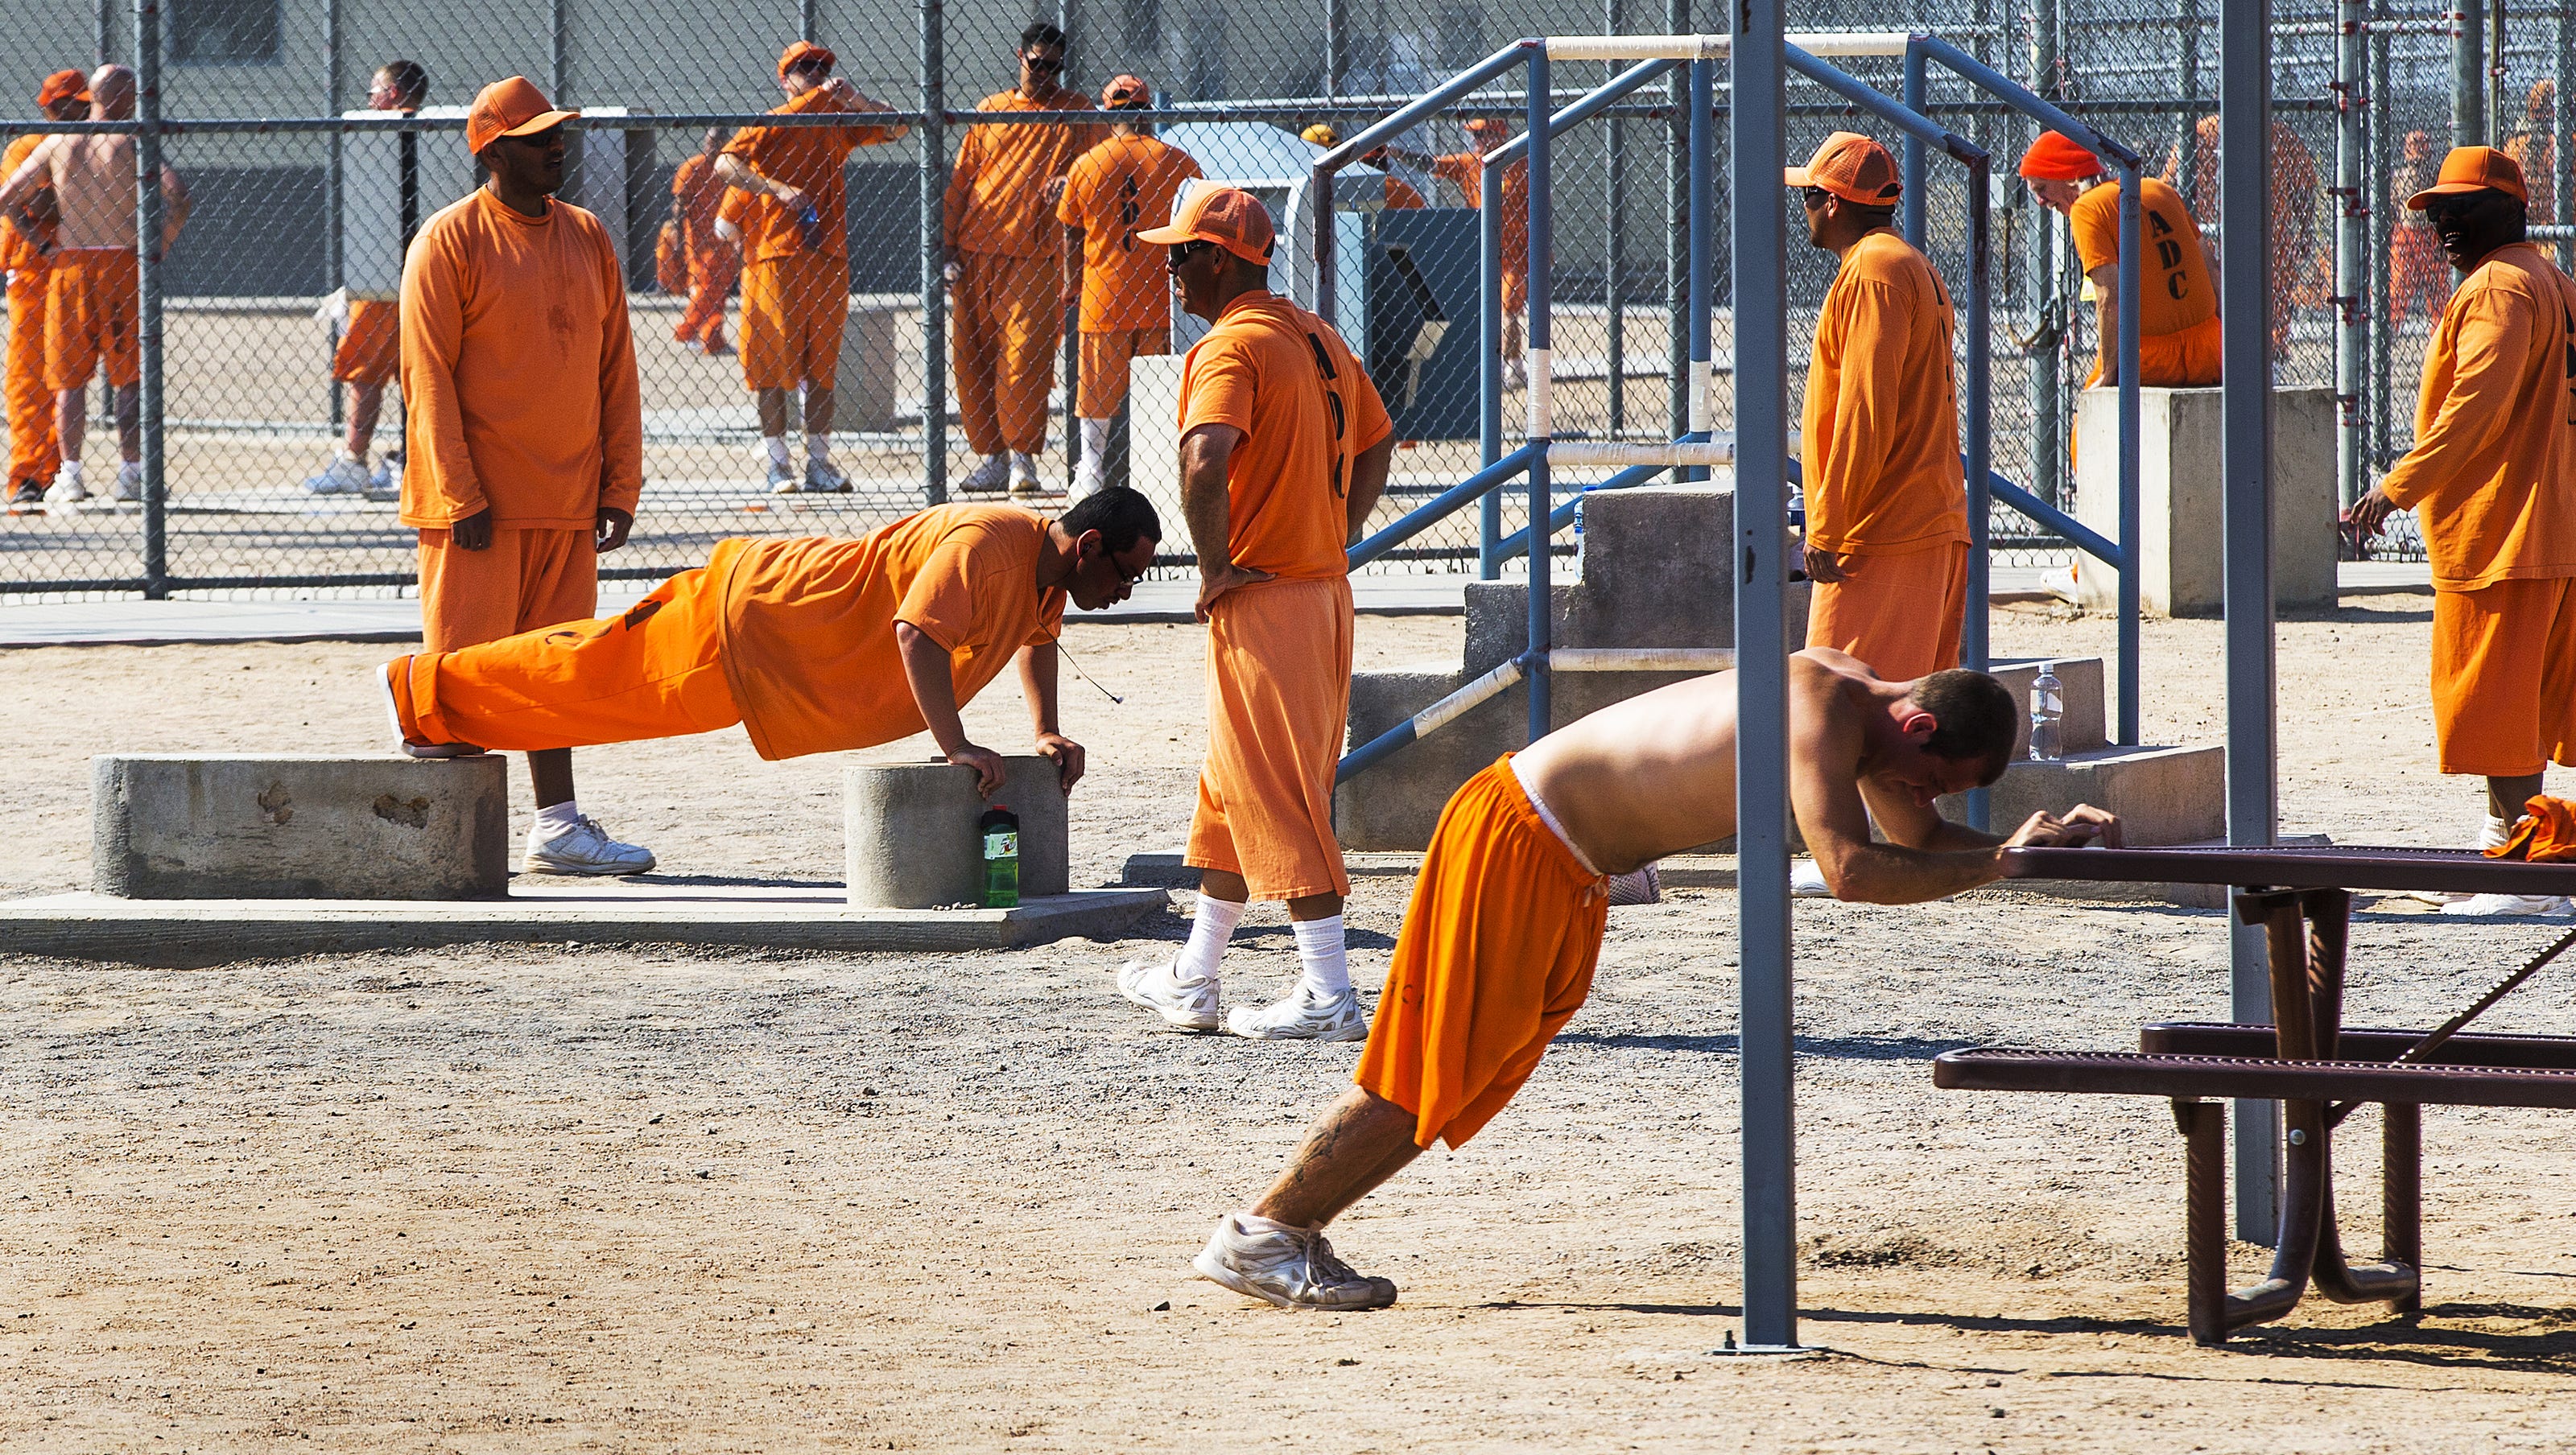 Big Changes Made To Make Kingman Private Prison Safer Year After Riot